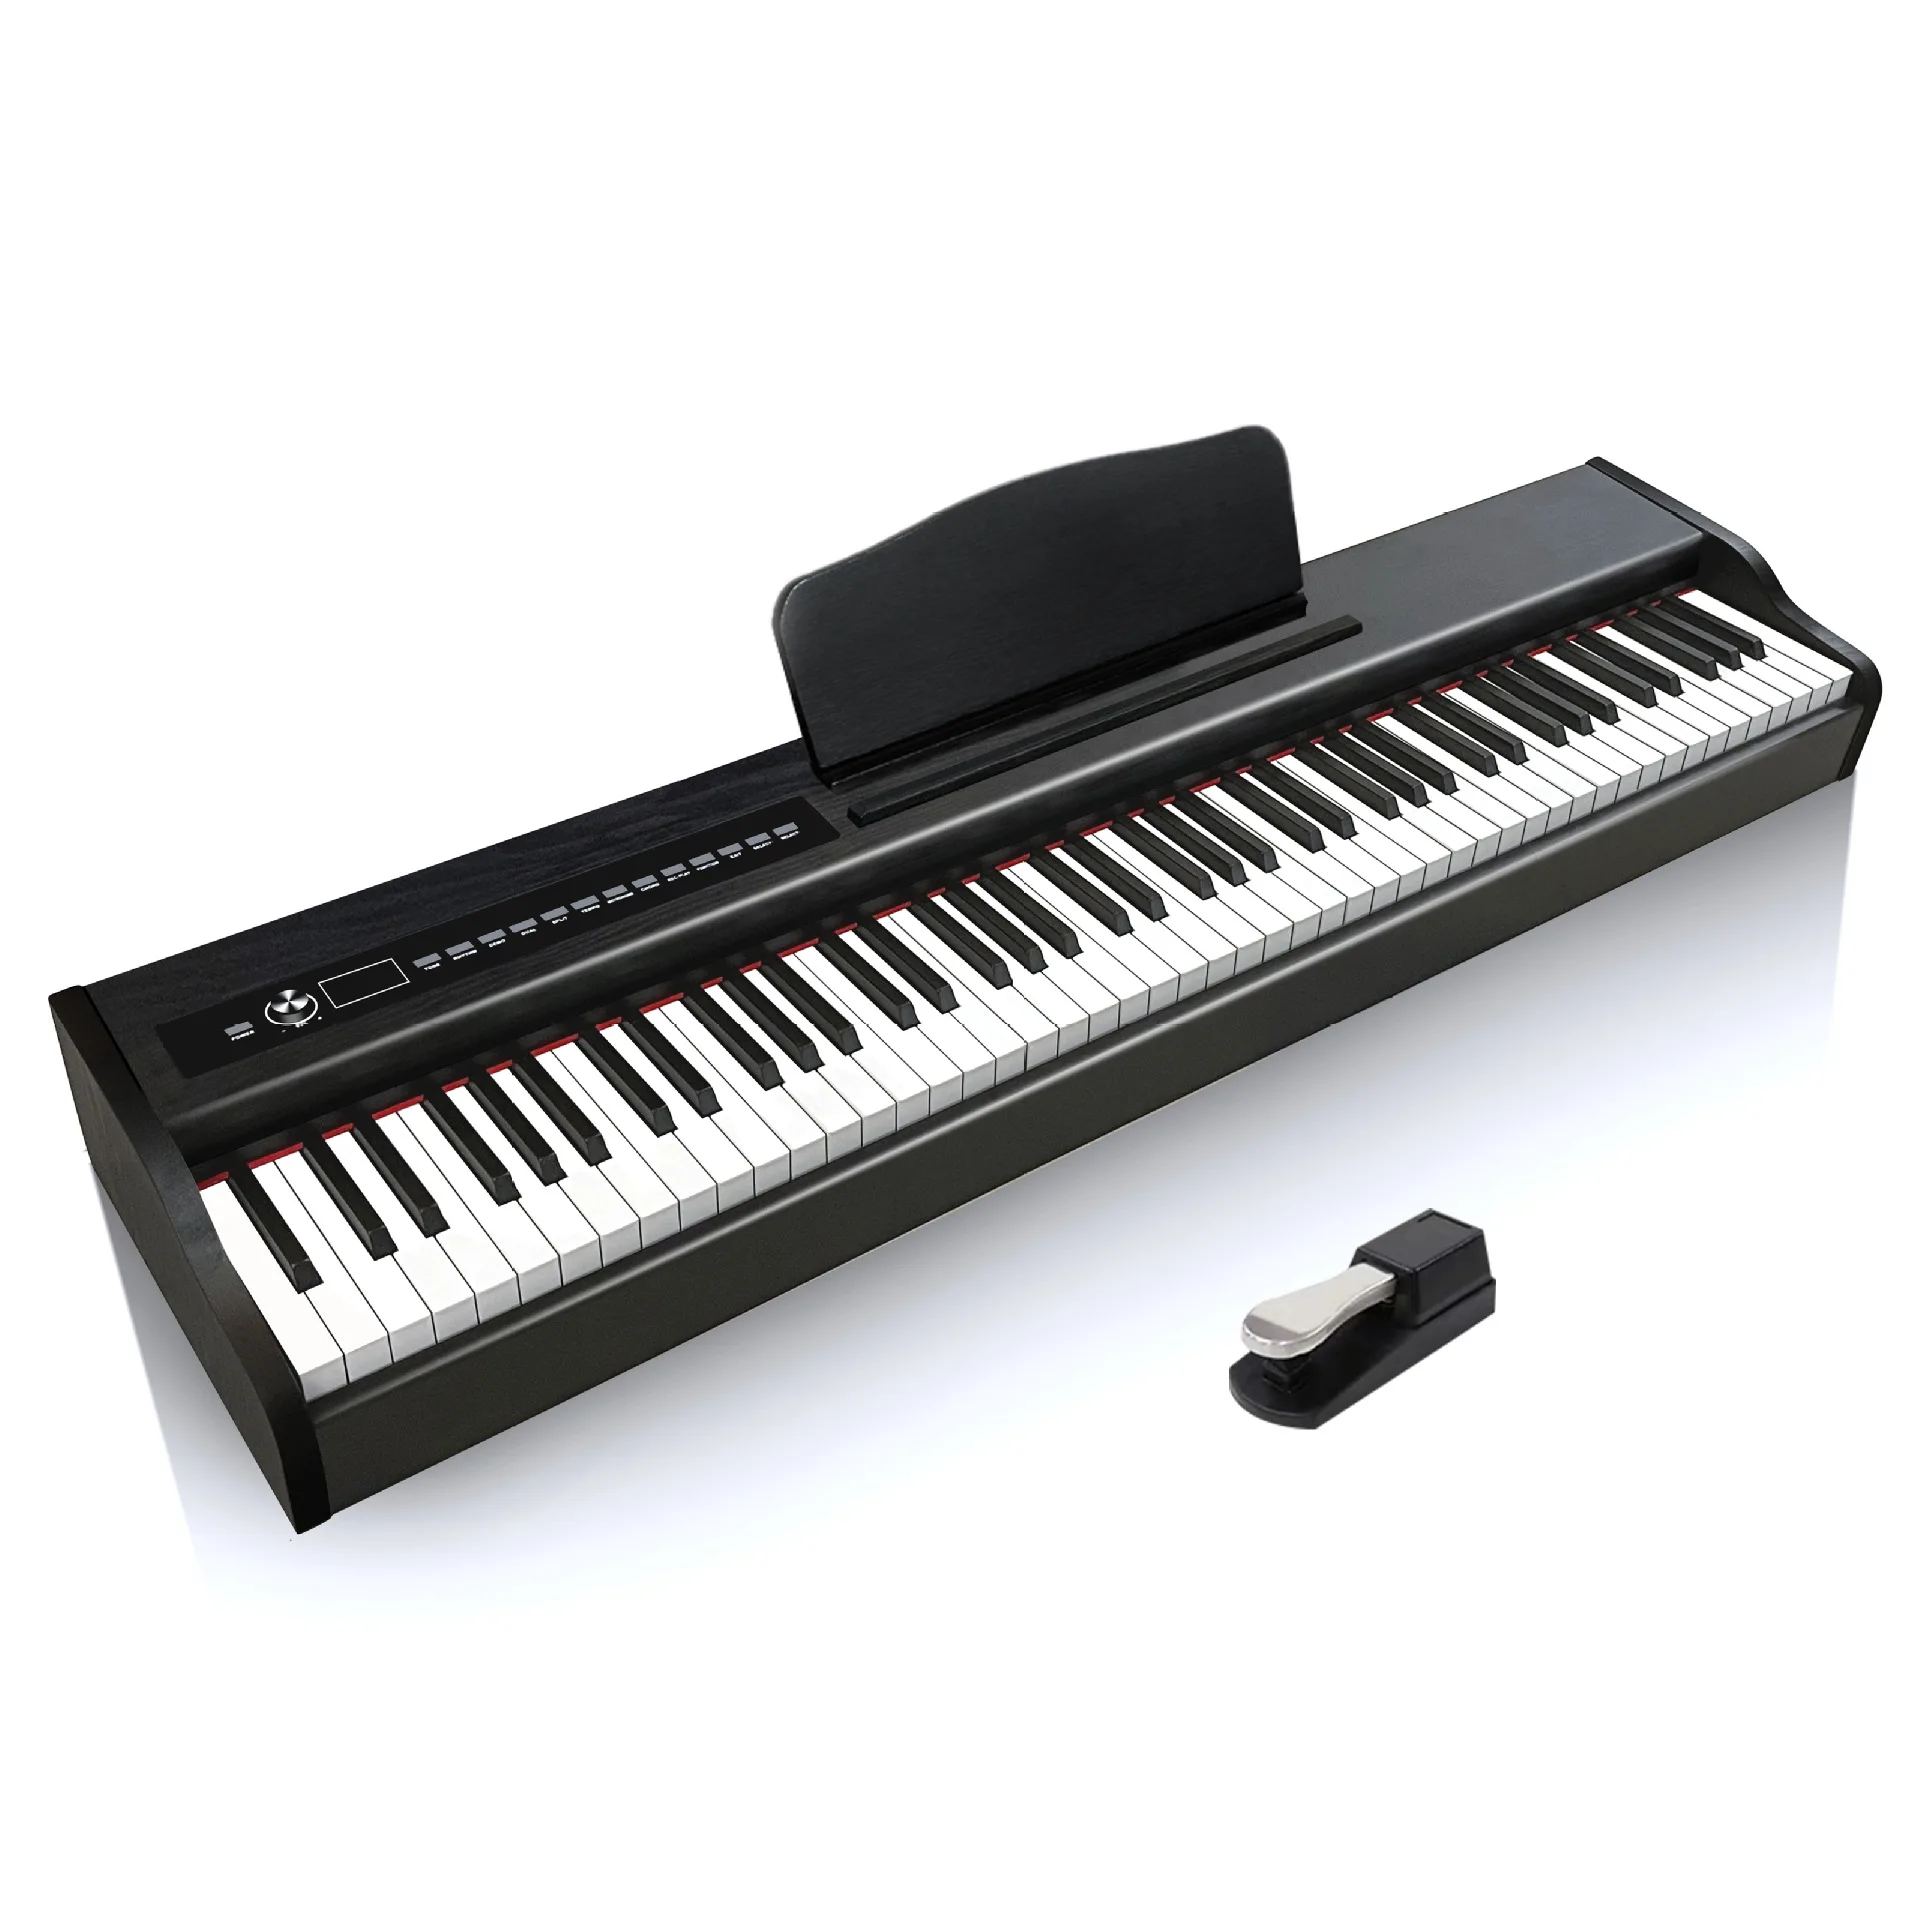 Foldable Instruments Musical Keyboard Stand Midi Controller Digital Piano 88 Key Weighted Teclado Infantil Electronic Organ